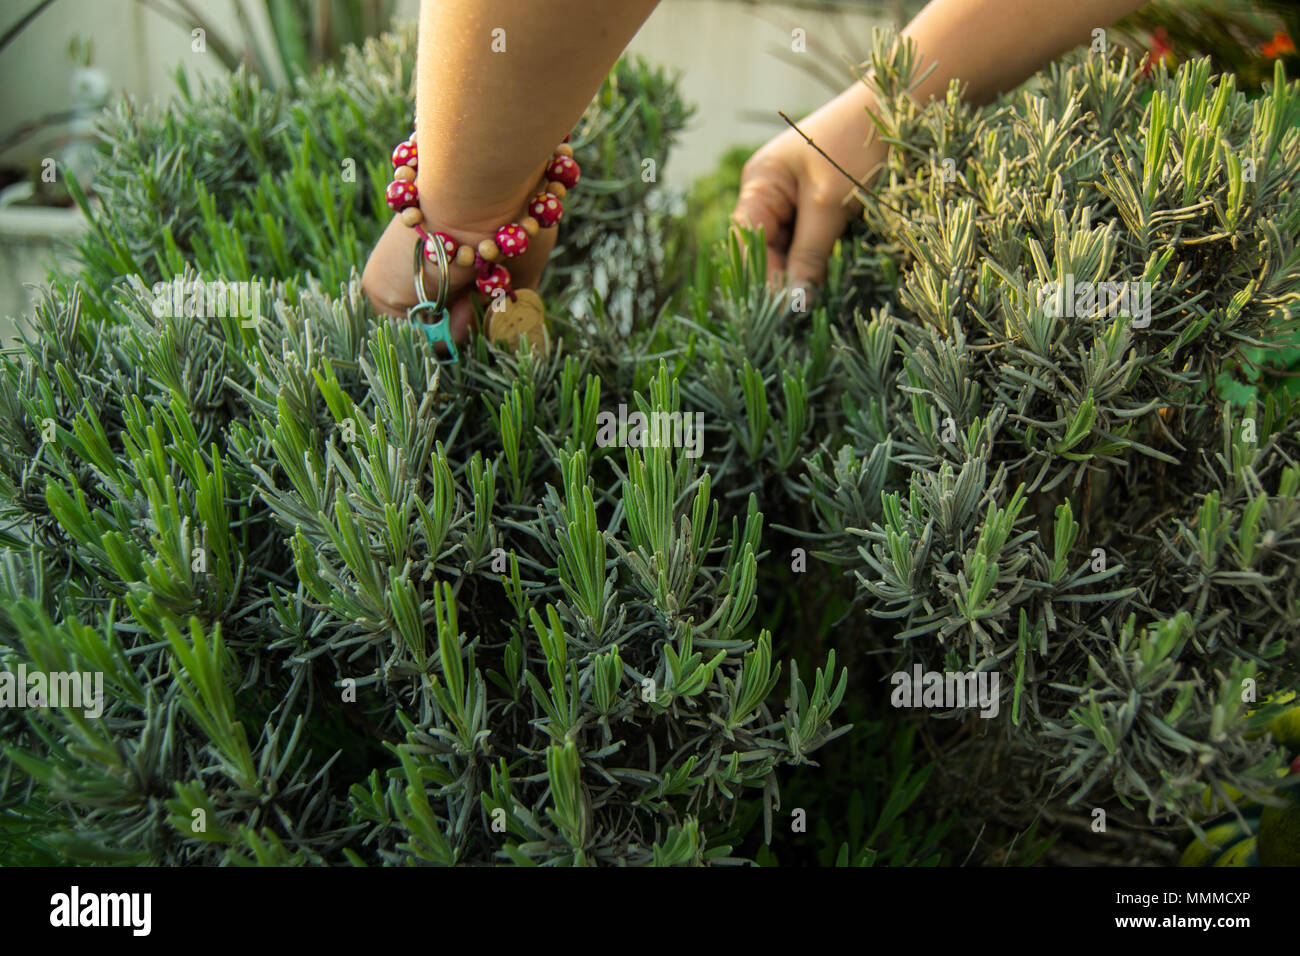 Kids searching for bugs in the garden with the hands in lavender garden Stock Photo